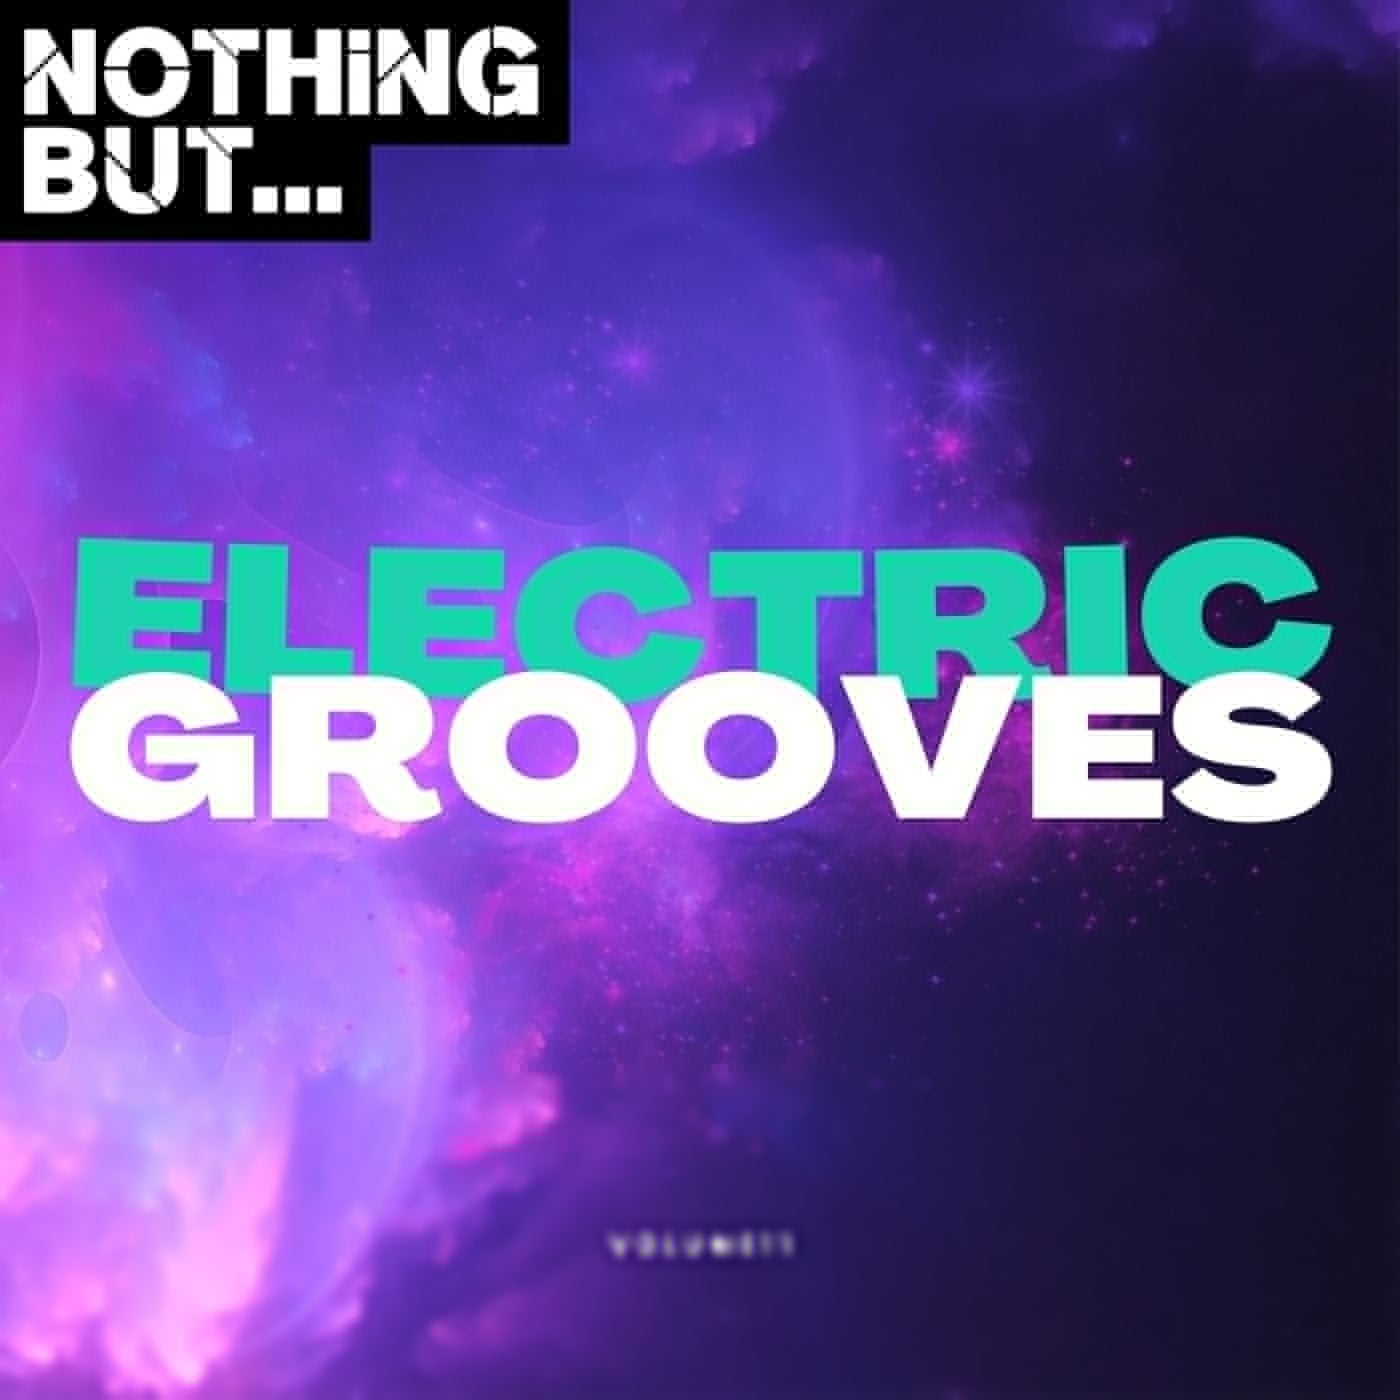 Nothing But... Electric Grooves, Vol. 11